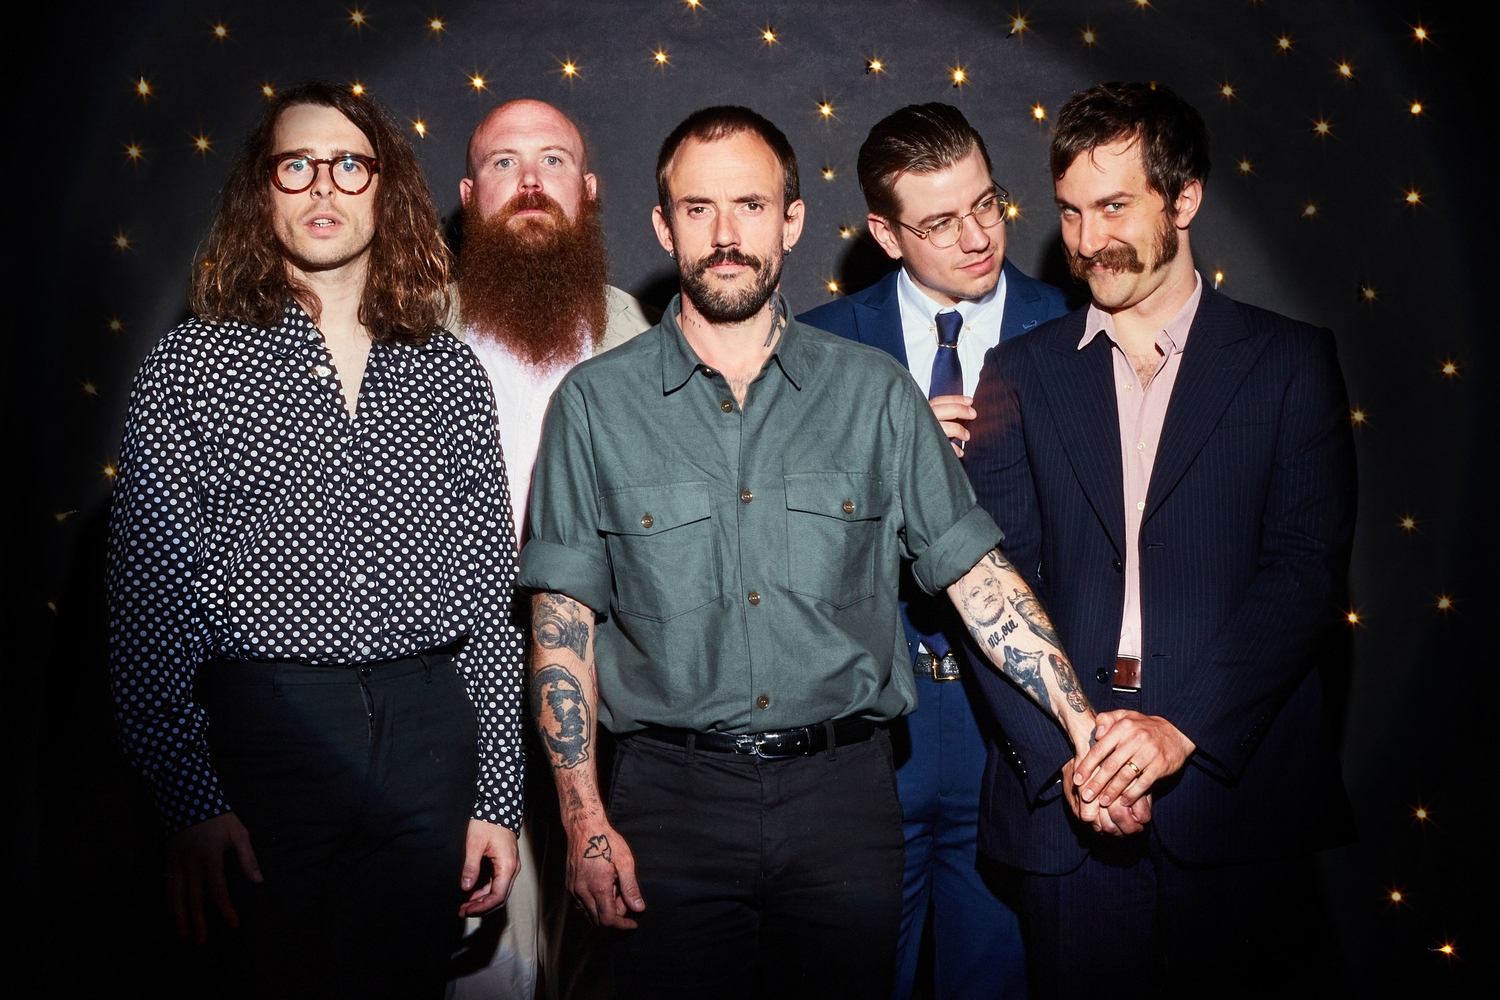 IDLES are the cover stars of DIY’s 100th issue!